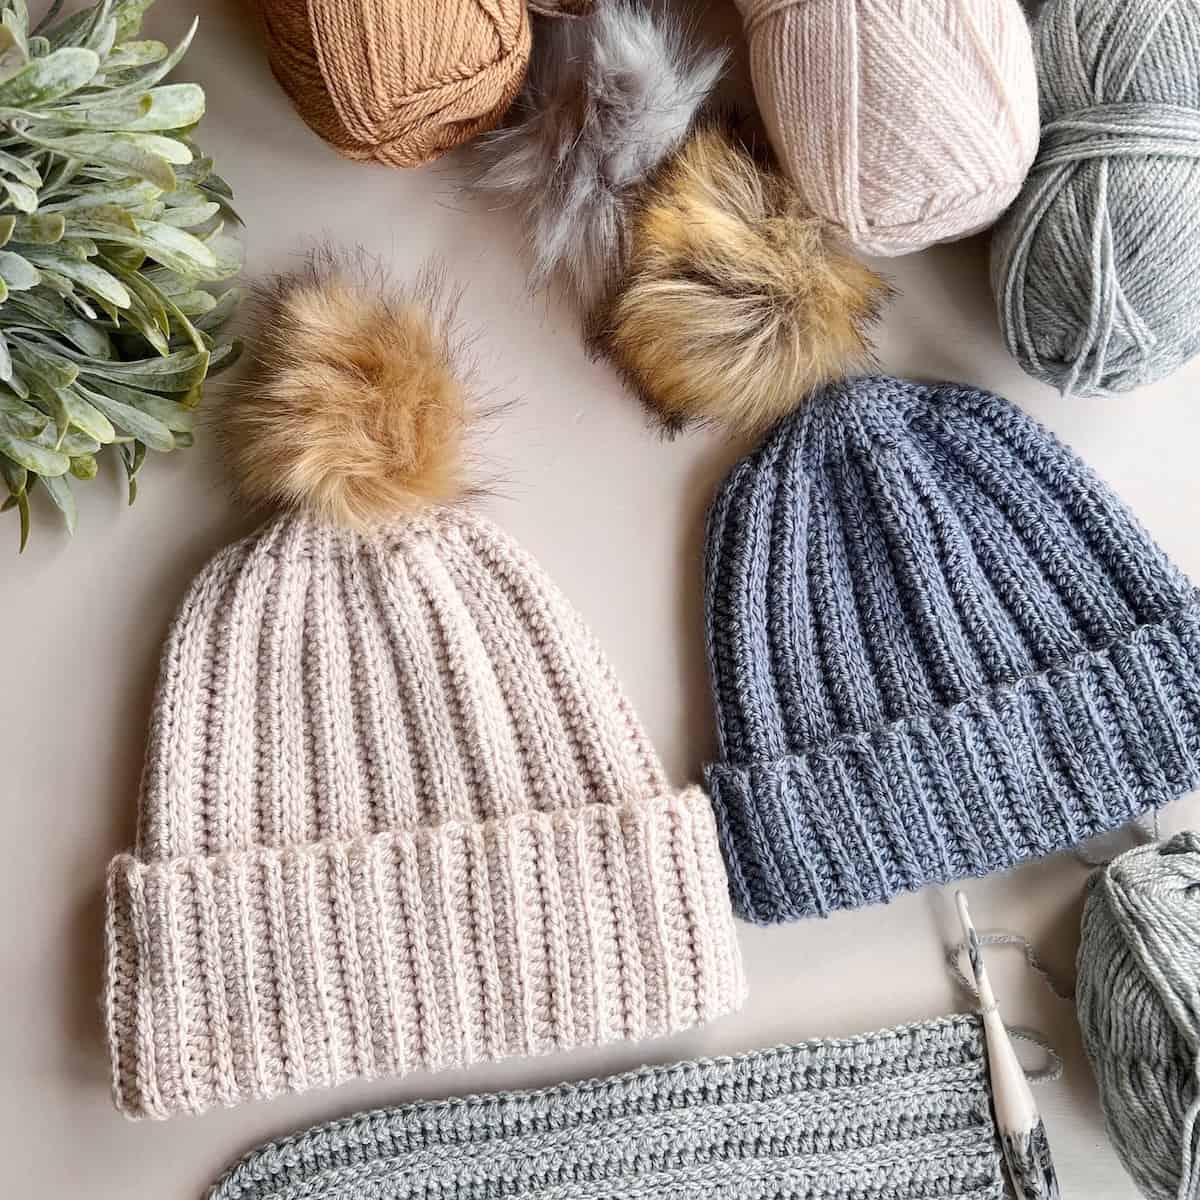 Beginner Ribbed Crochet Hat Pattern (Easy and Fast!)